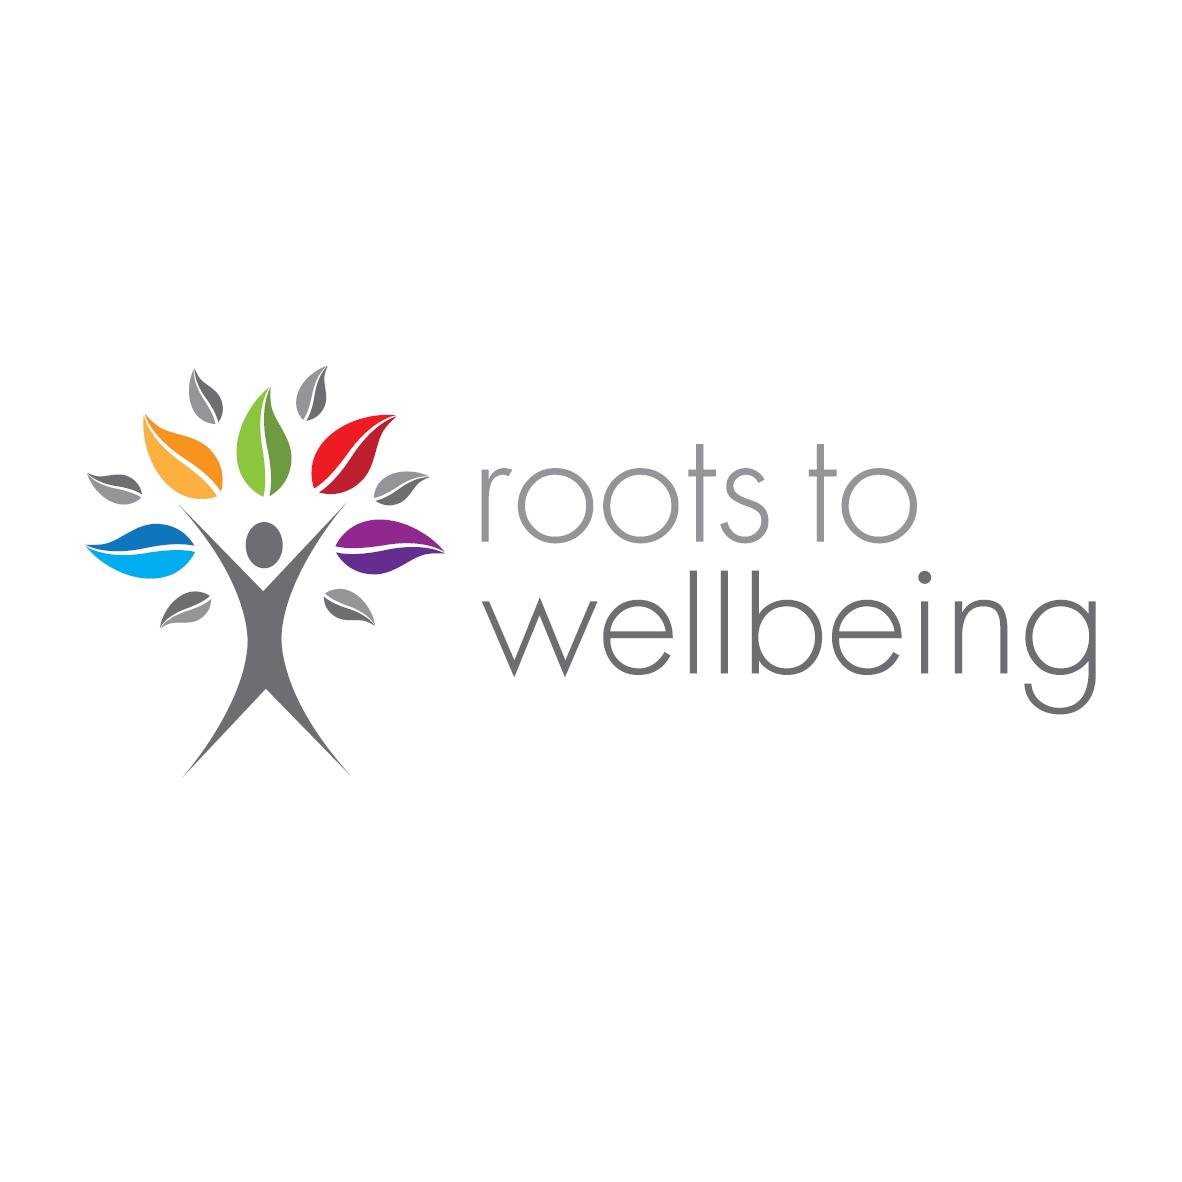 Roots to Wellbeing